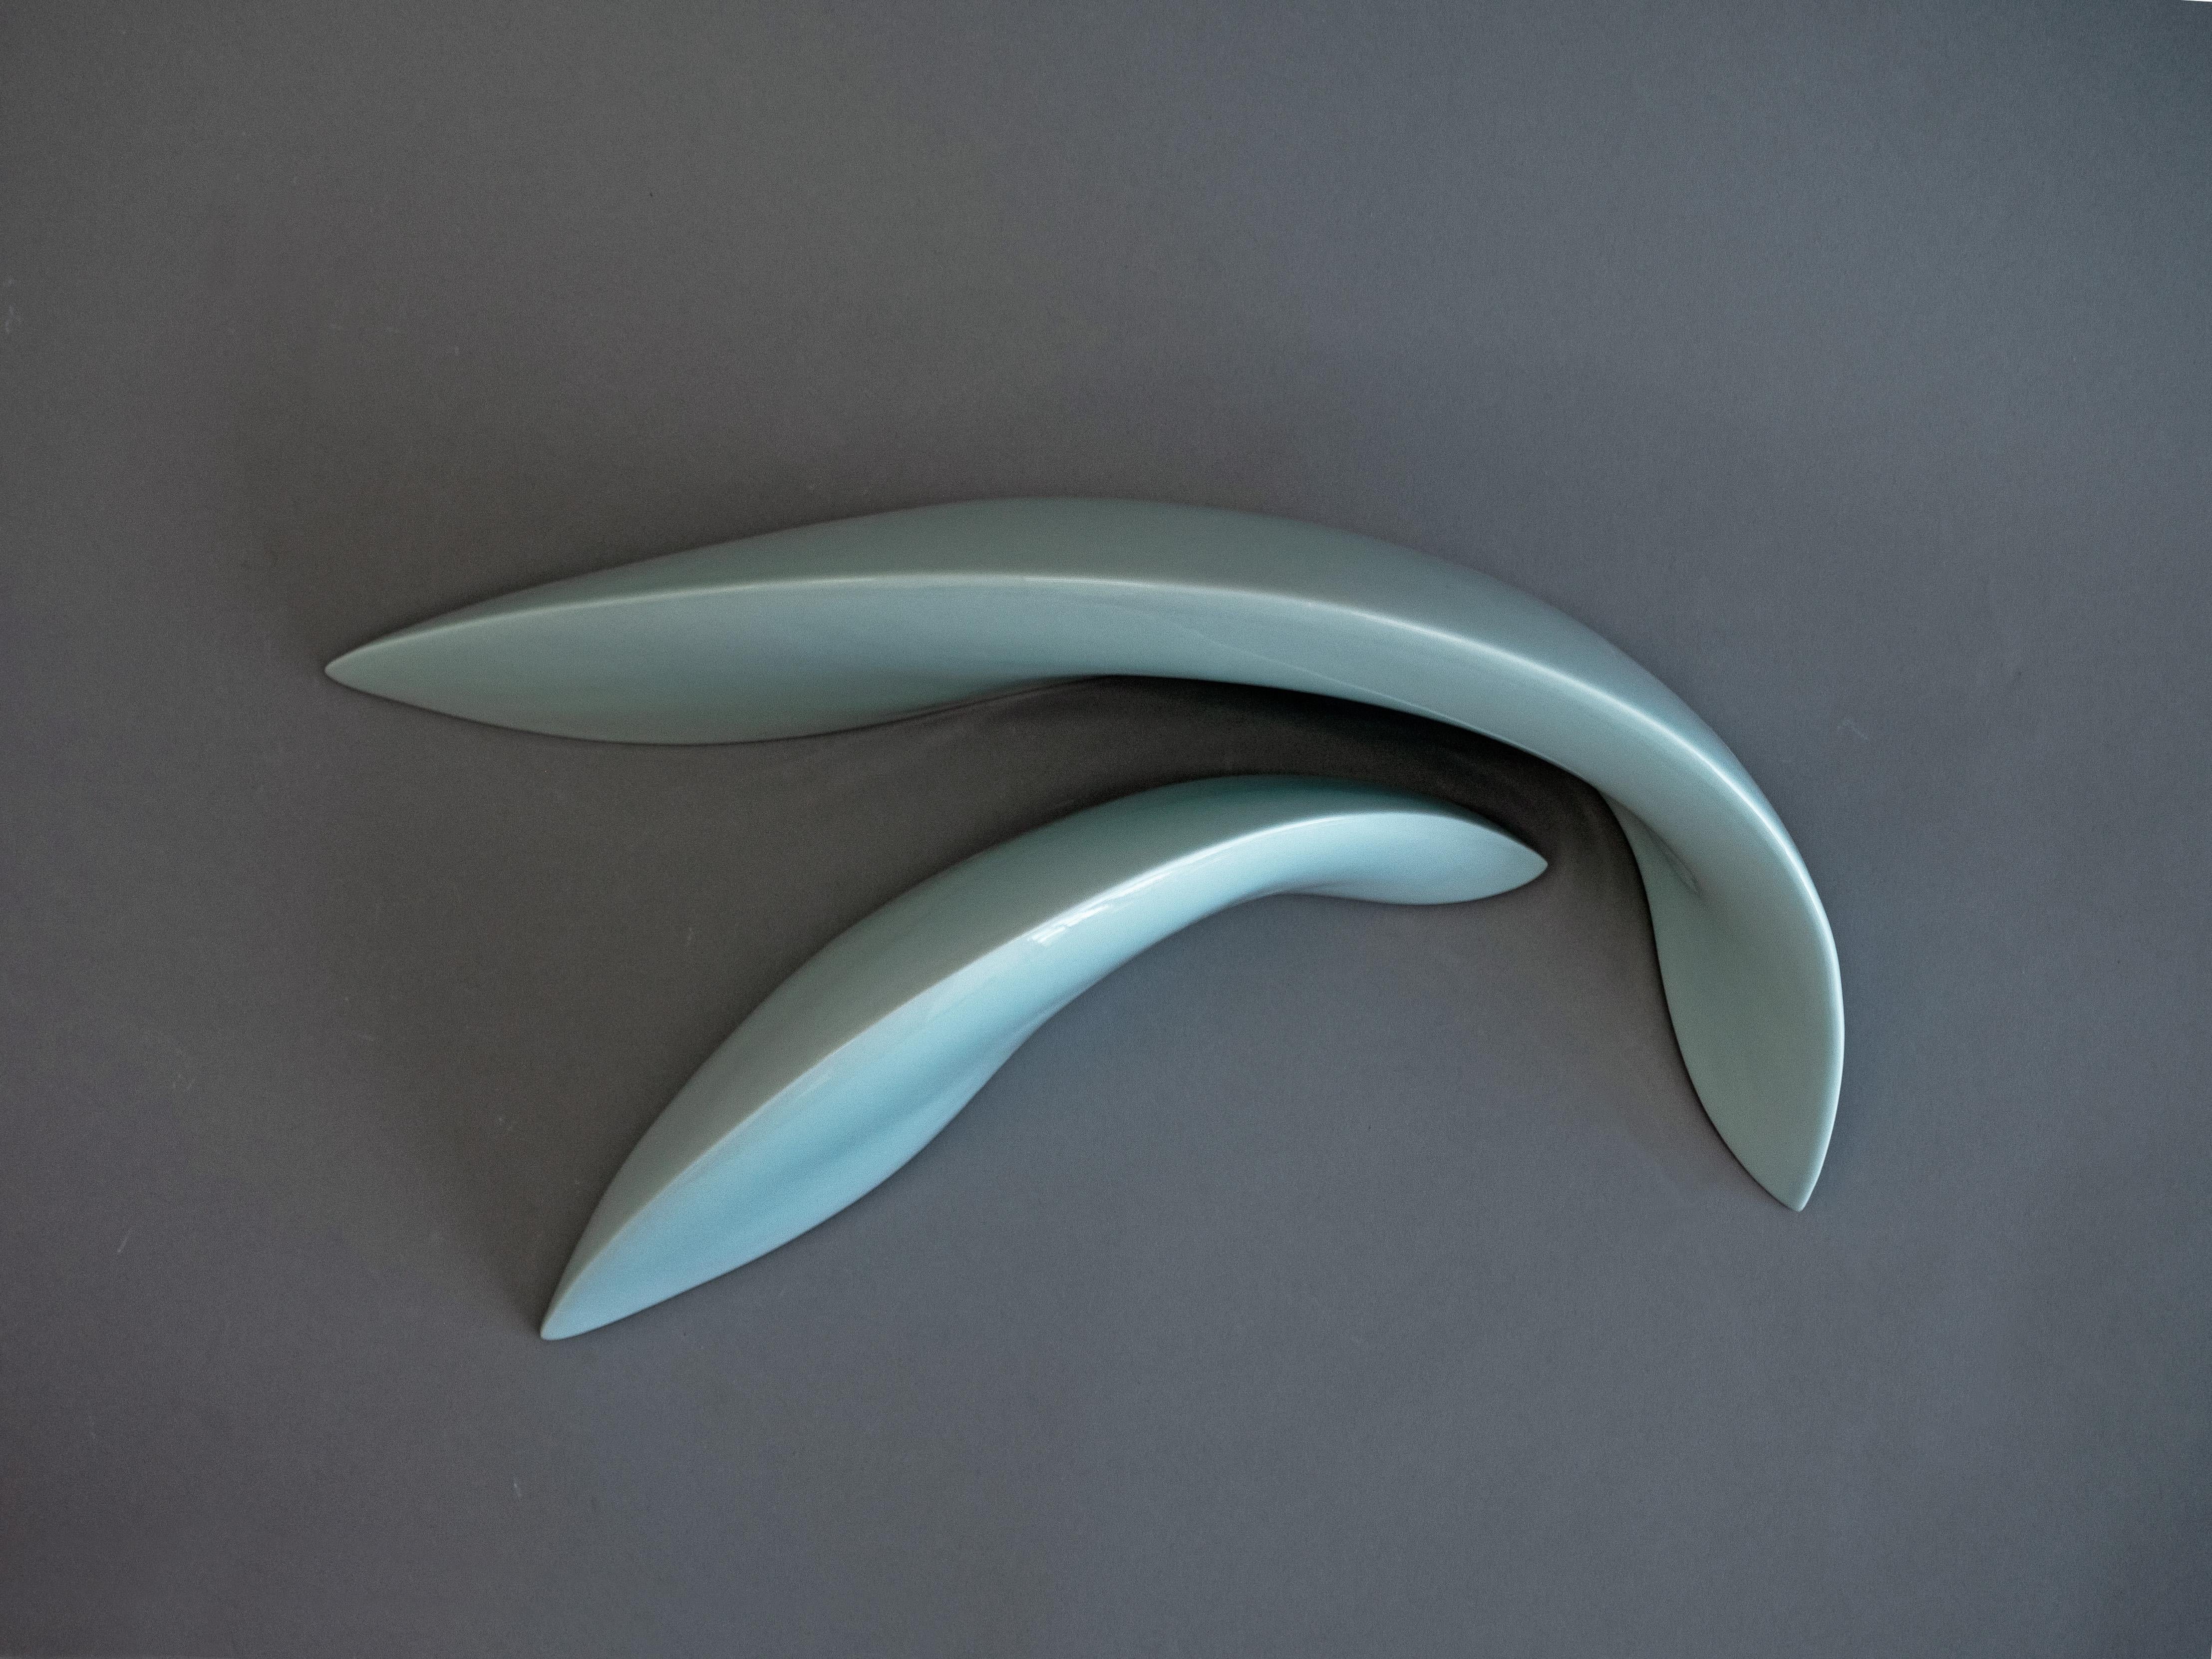 Abstract Table Sculpture - Ceramic Celadon Sculpture Pair by Soo Joo For Sale 2